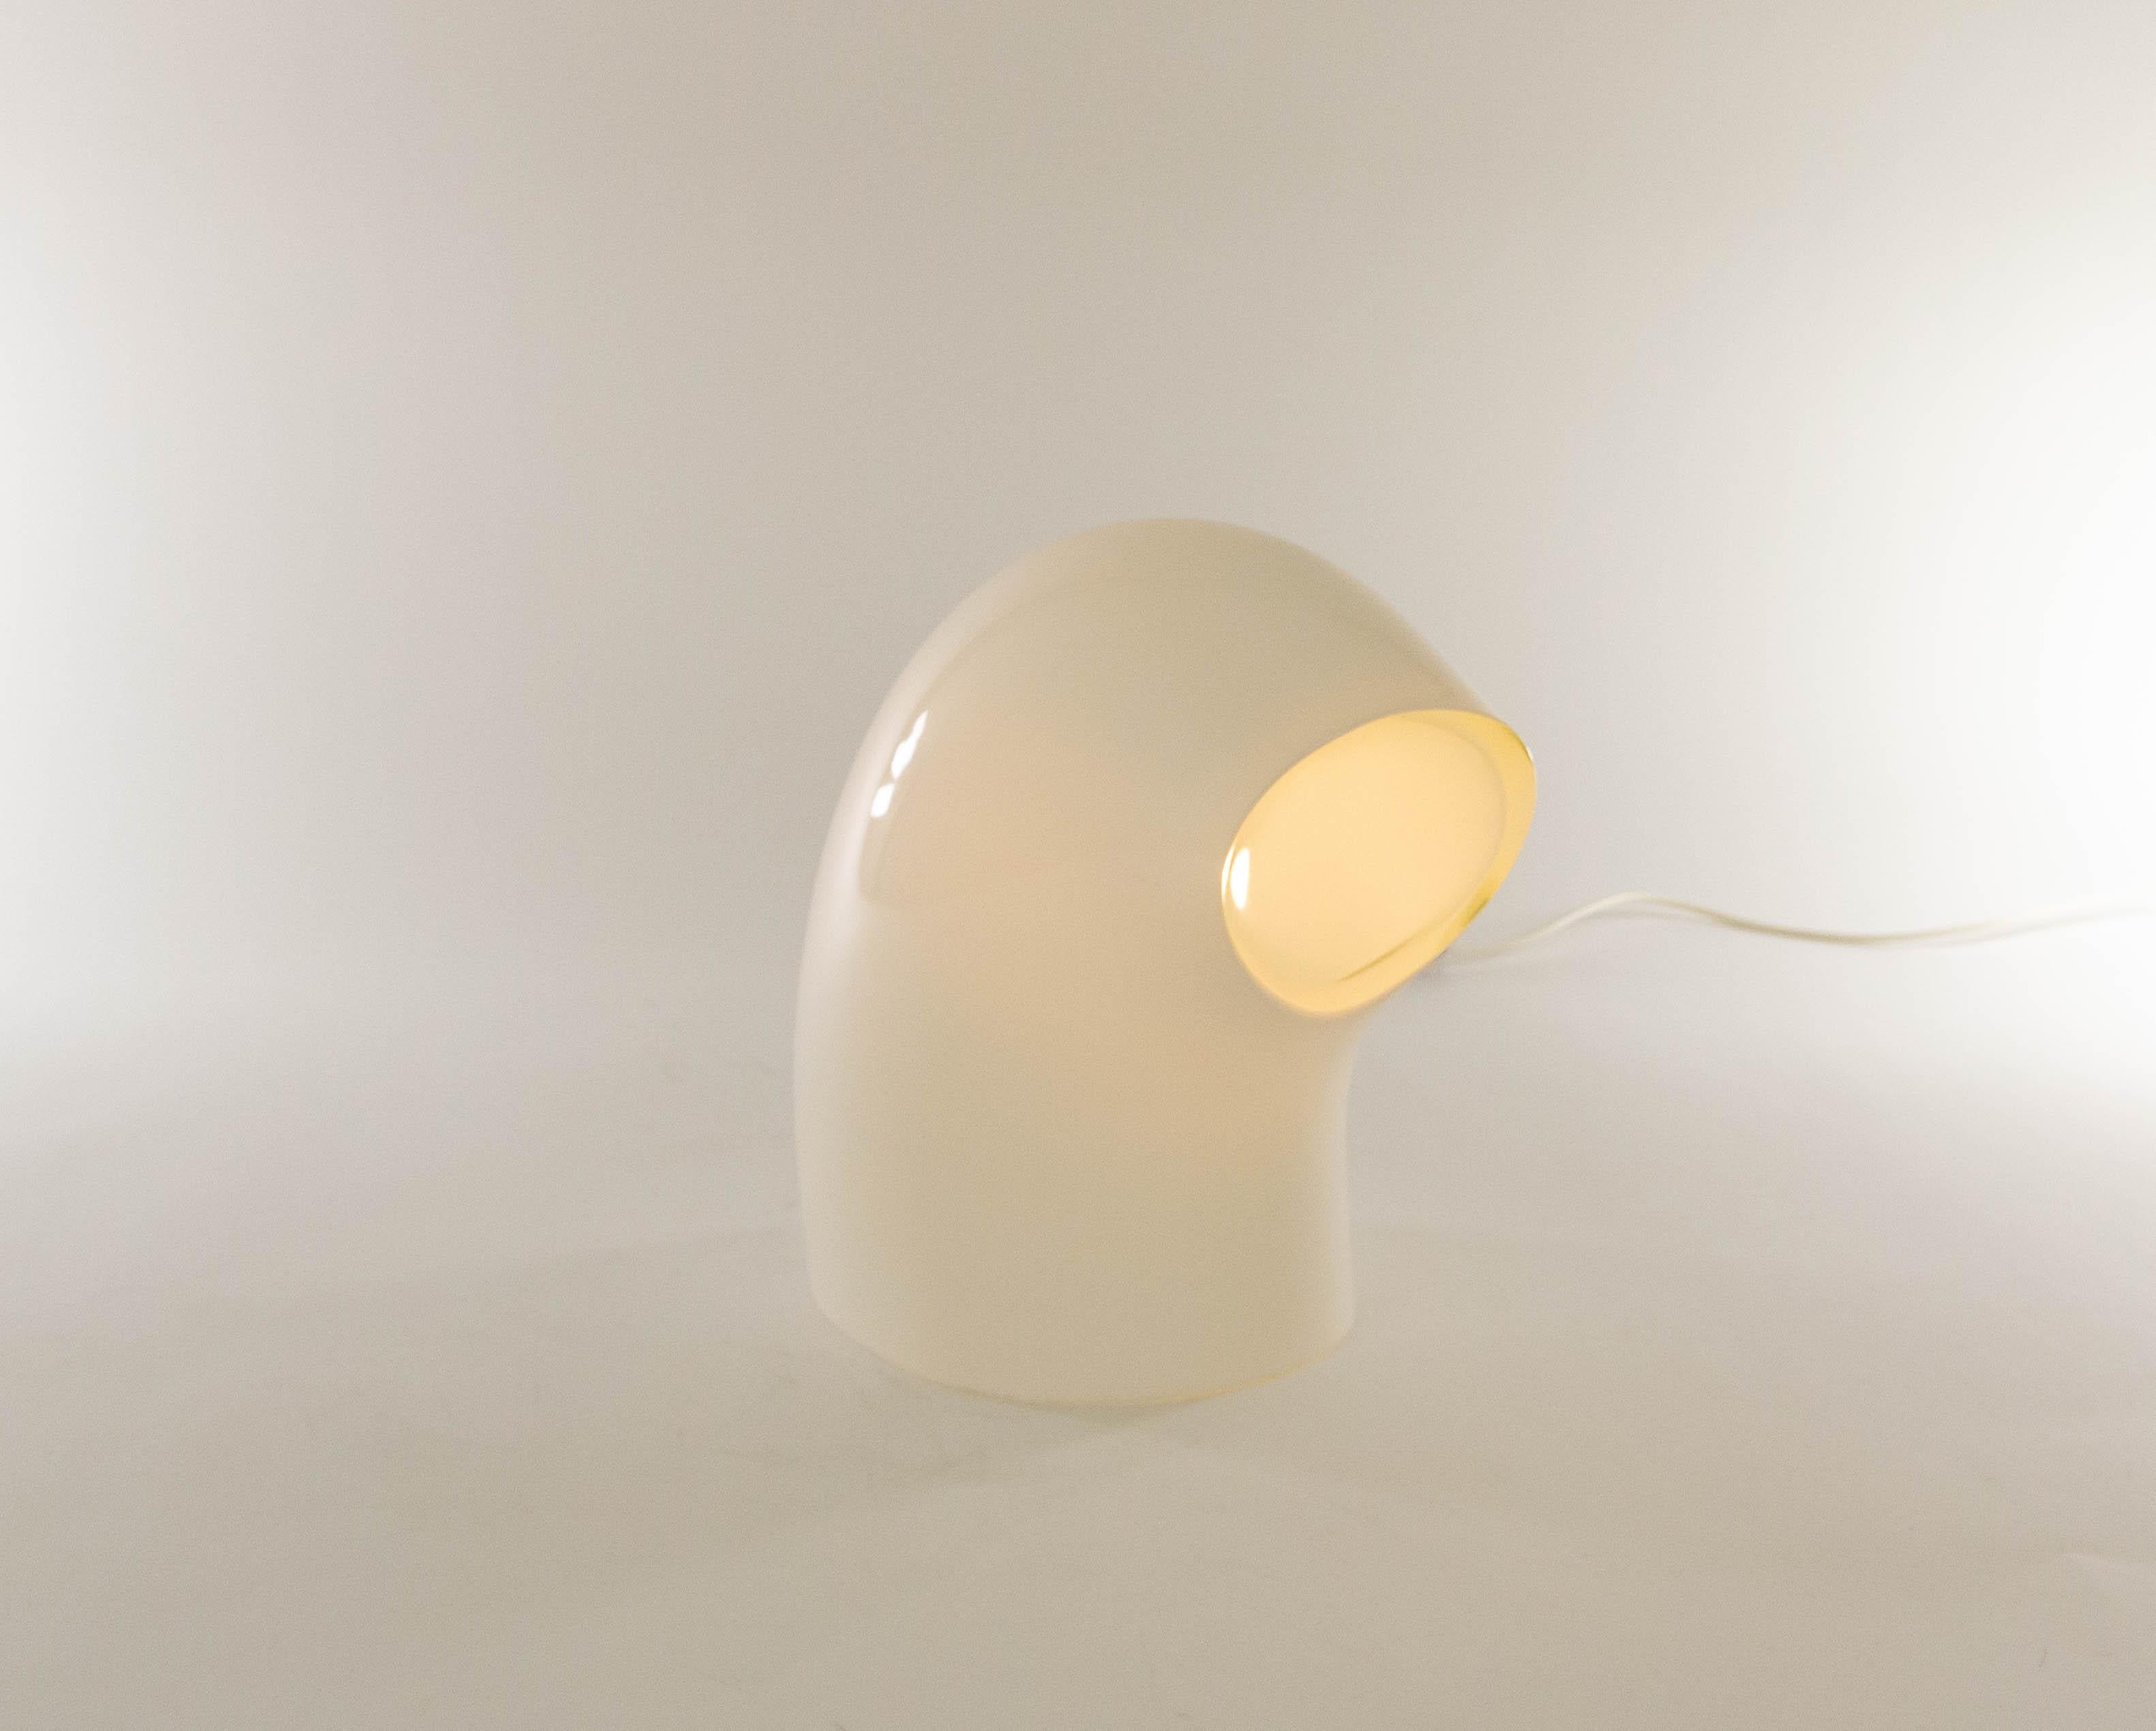 L 290 table lamp designed by Gino Vistosi for Vetreria Vistosi in the 1970s. It is executed in opaline white Murano glass.

The lamp is an object in itself, and also provides concentrated light through the built-in lens. The glass is thick and